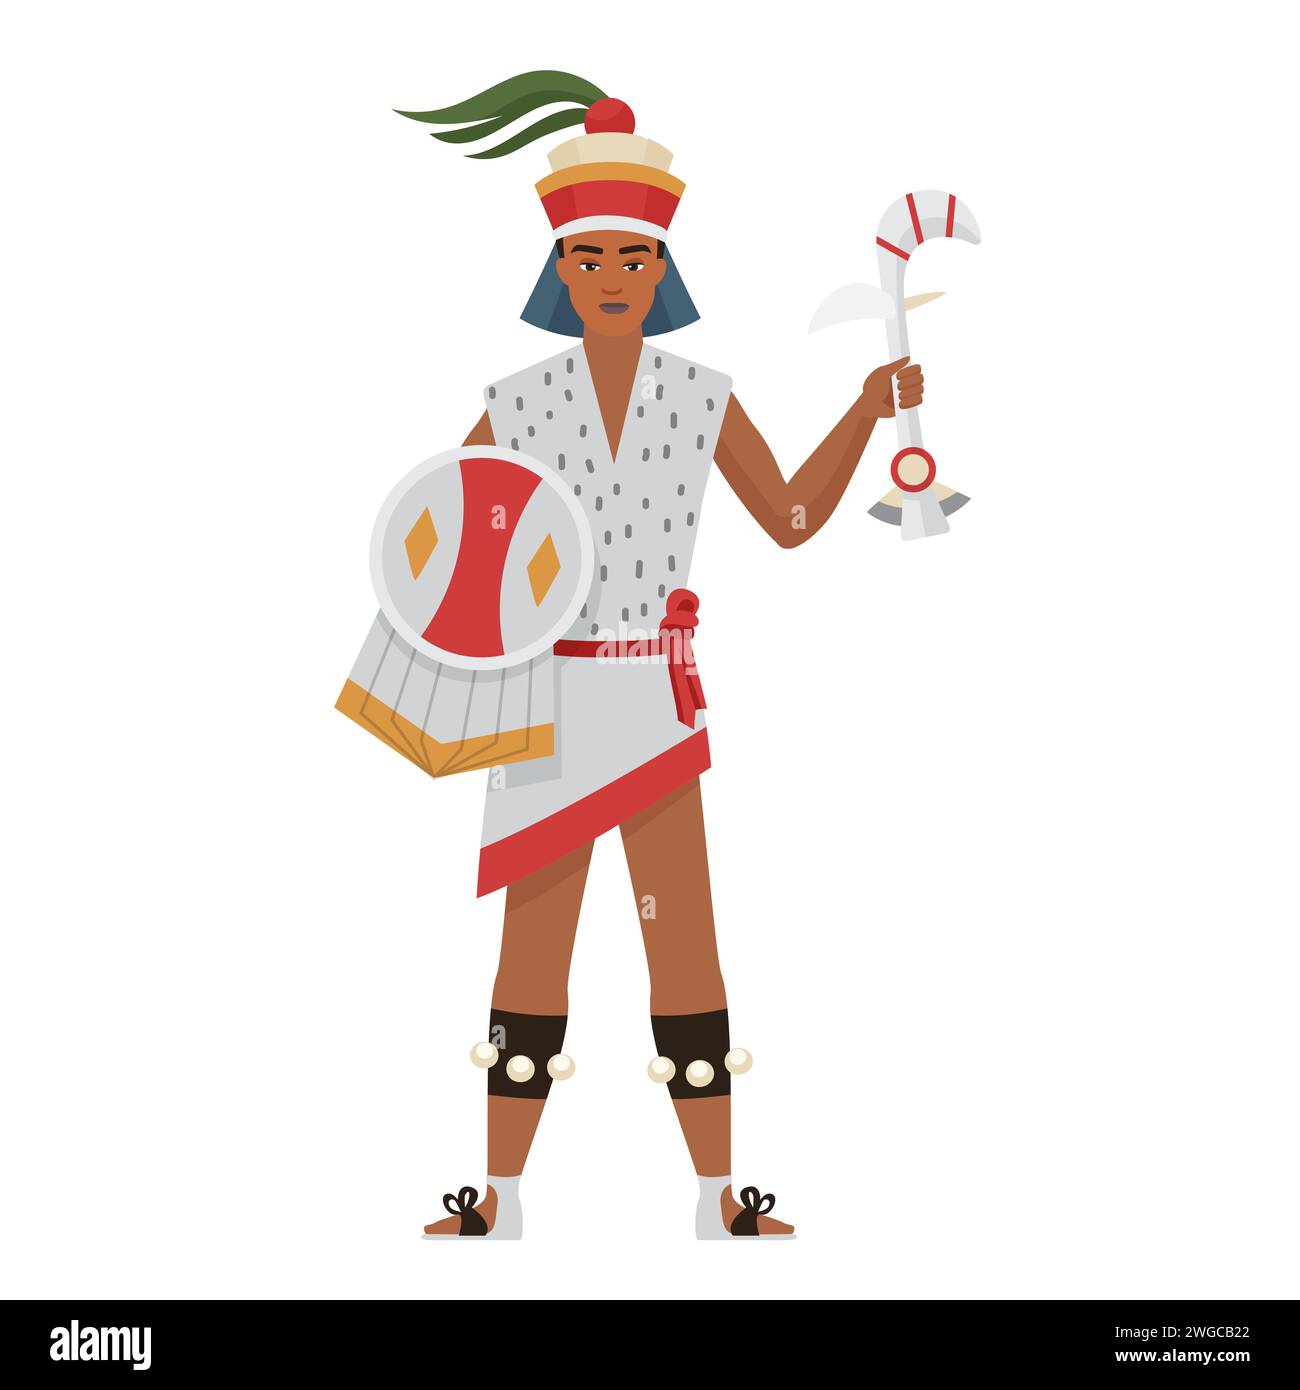 Aztec warrior of ancient tribe, man in headdress crown holding shield and weapon vector illustration Stock Vector